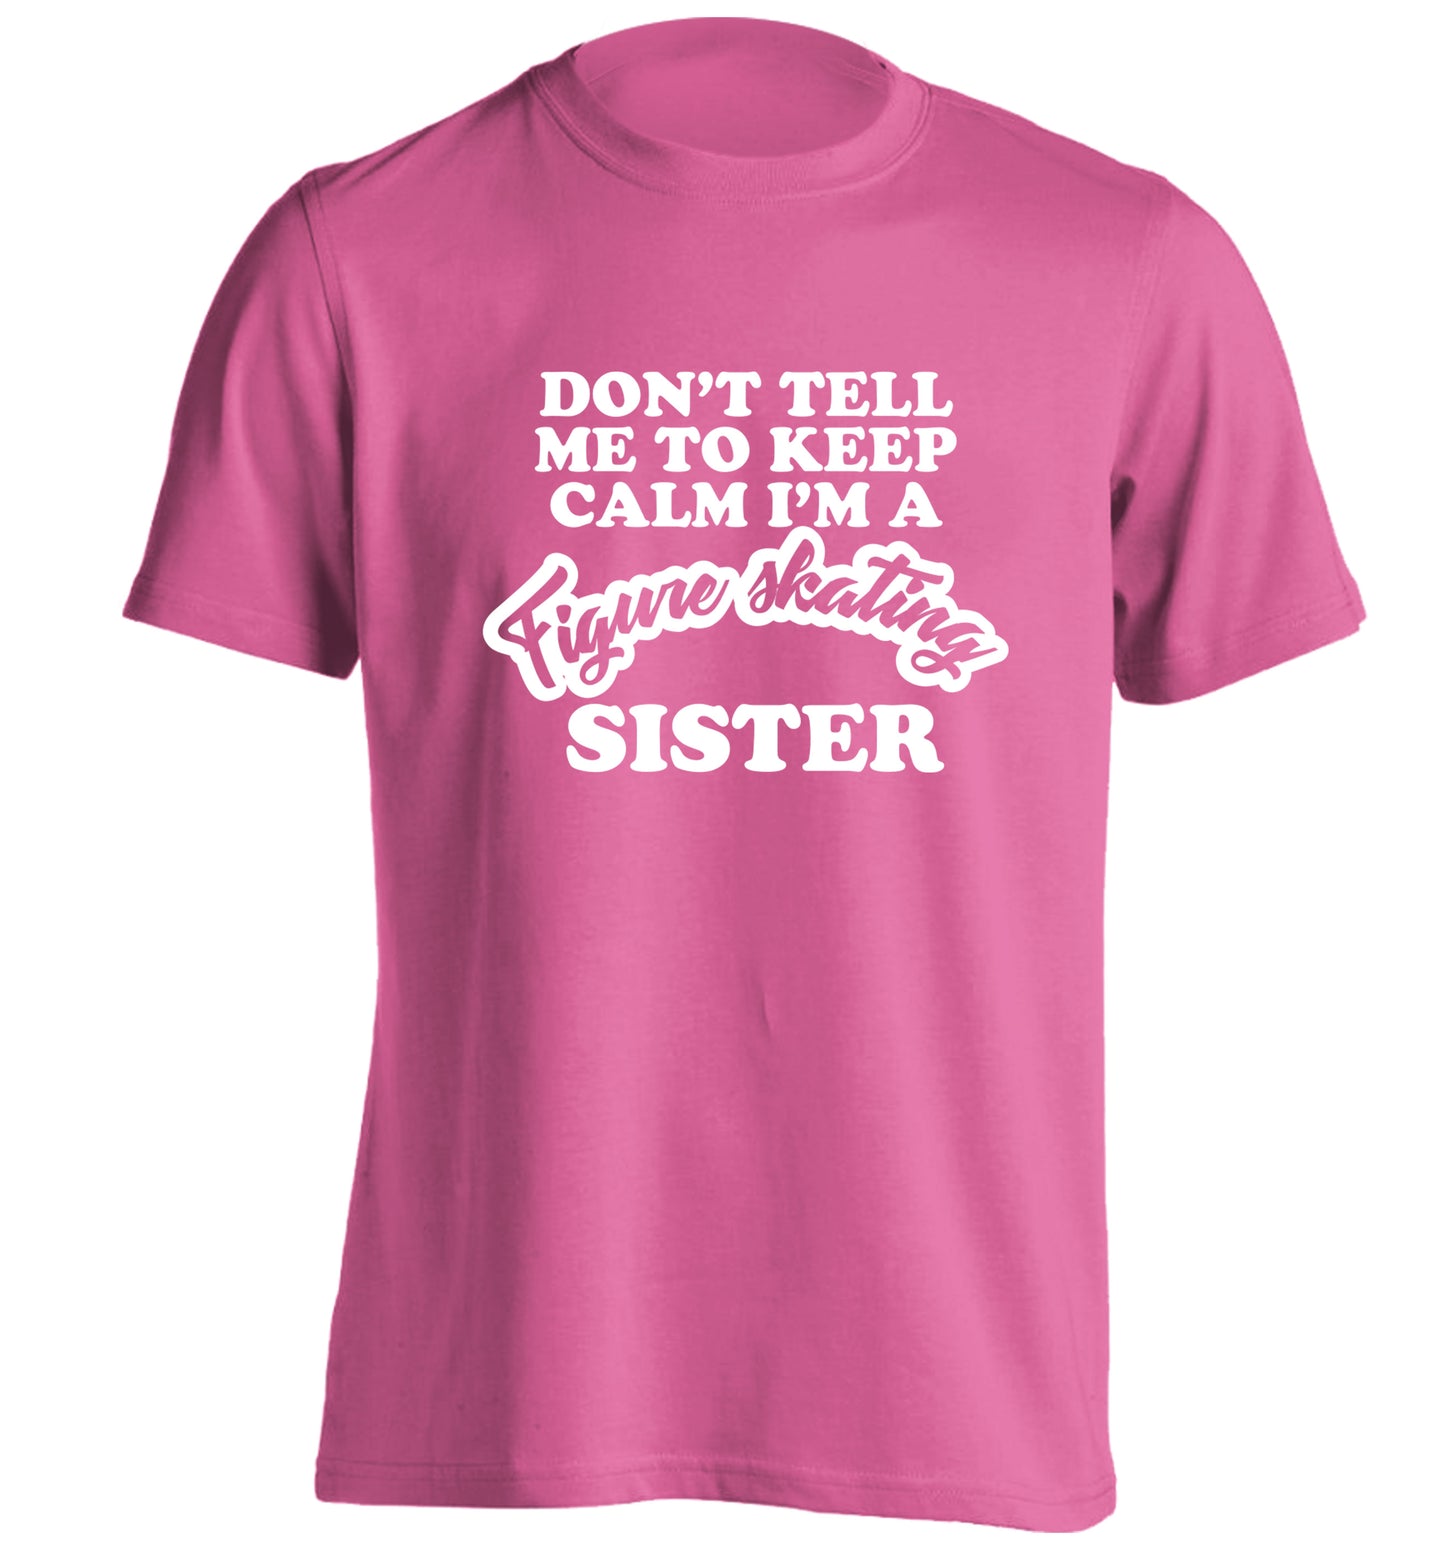 Don't tell me to keep calm I'm a figure skating sister adults unisexpink Tshirt 2XL